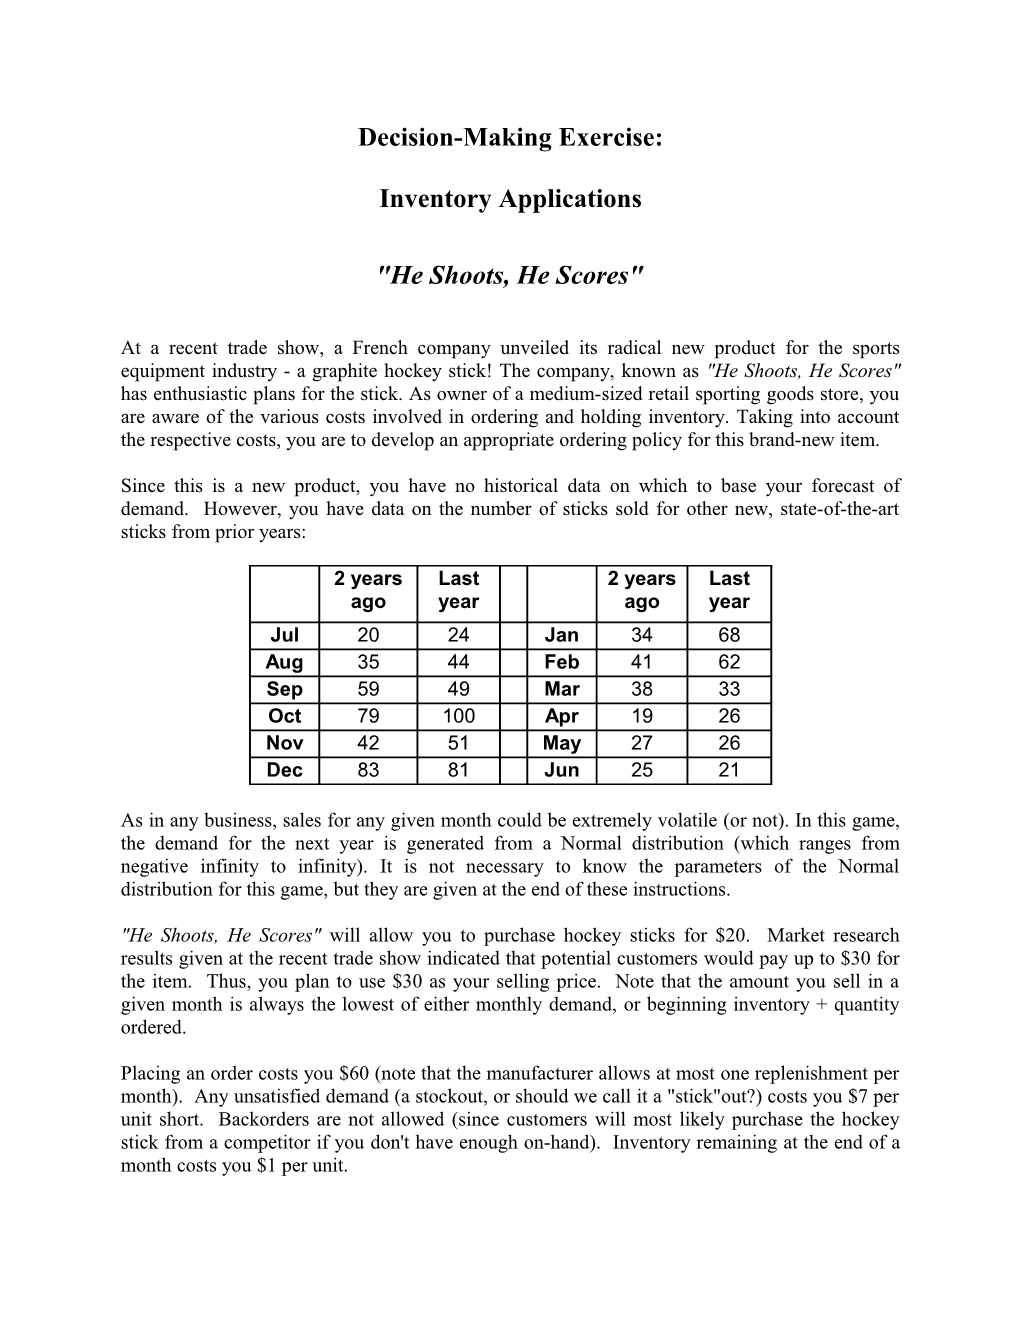 Inventory Applications